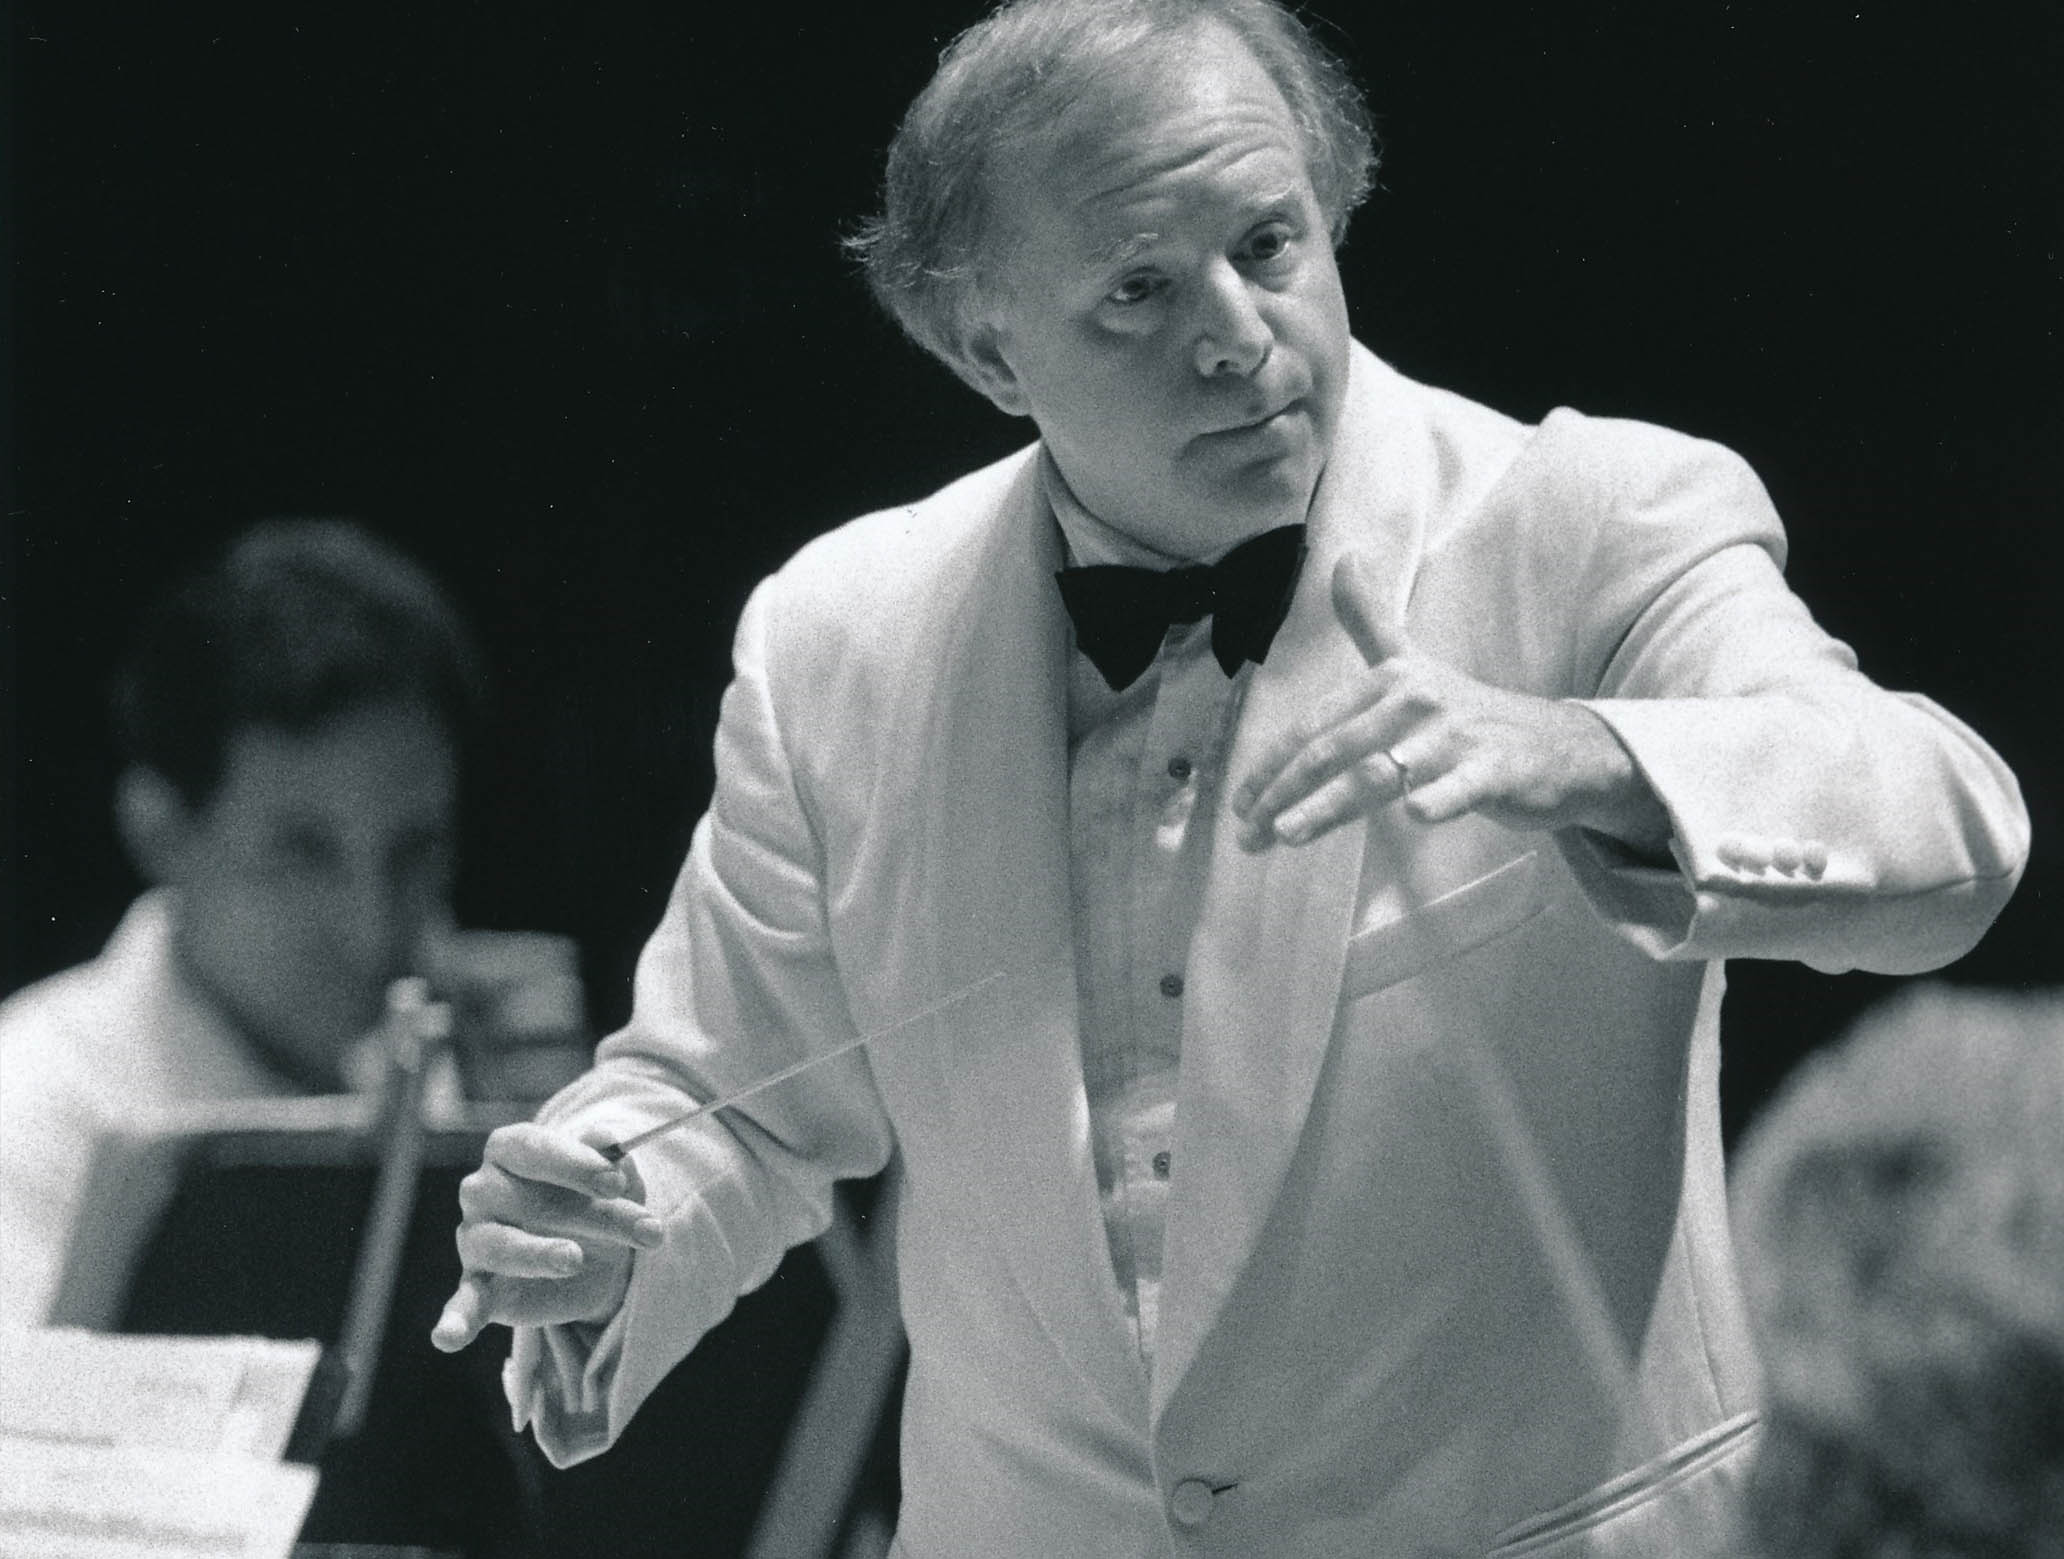 Leonard Slatkin conducting the Orchestra at Blossom Music Center. Slatkin and the Orchestra are dressed in white, which is formal dress for Blossom performances.